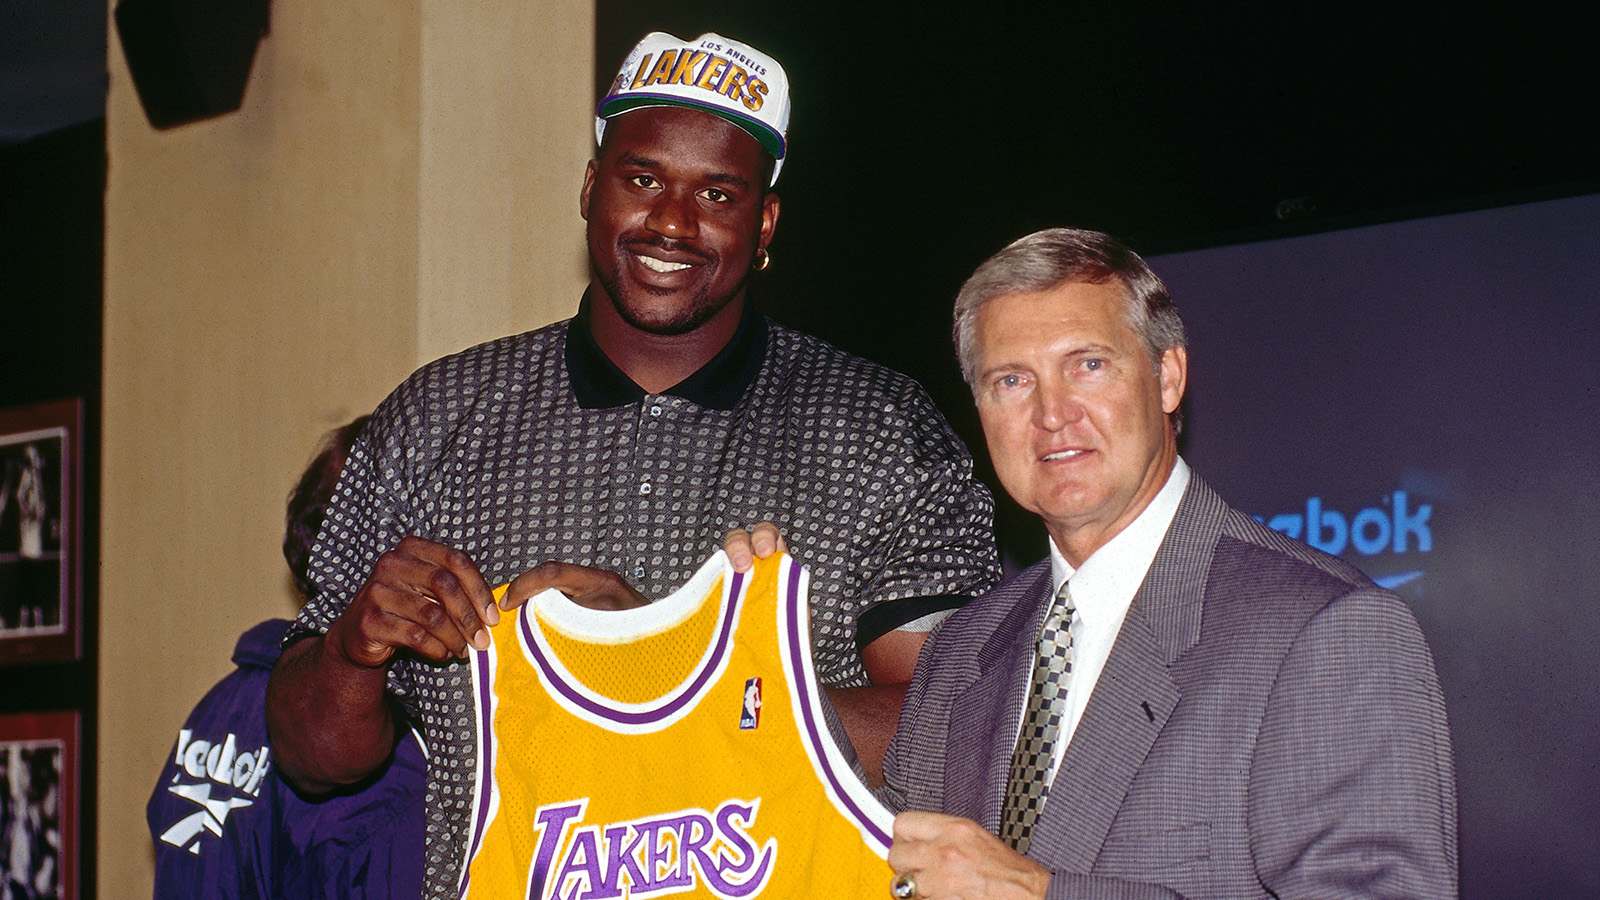 West introduces Shaq as a Los Angeles Laker